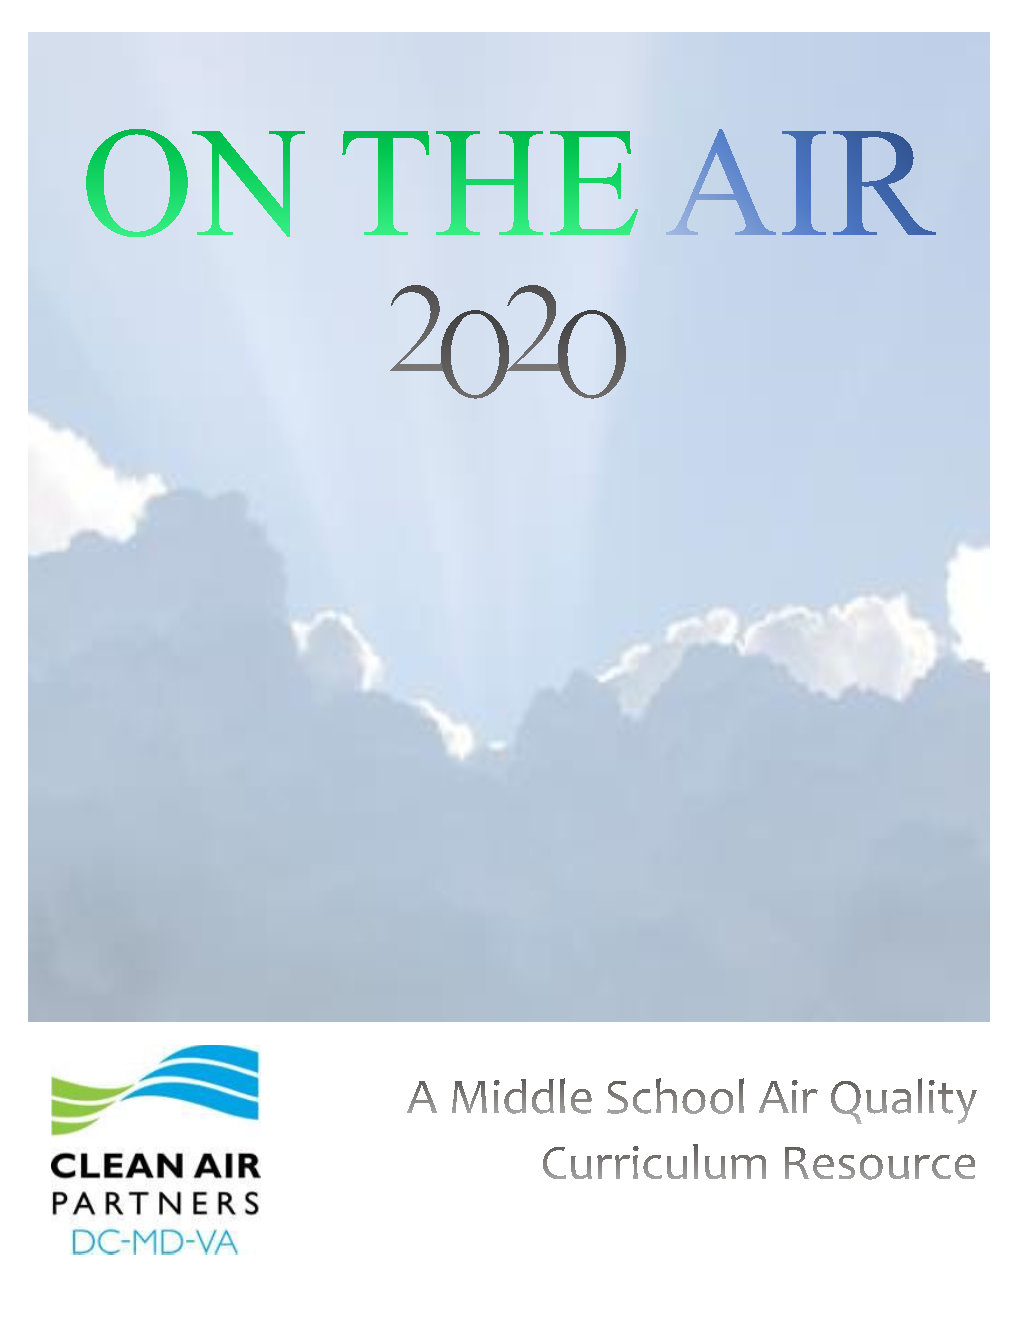 Curriculum As a Way to Help Educators Bring Air Quality Stewardship to Life for Middle School Students in the Washington D.C.- Maryland-Virginia Region